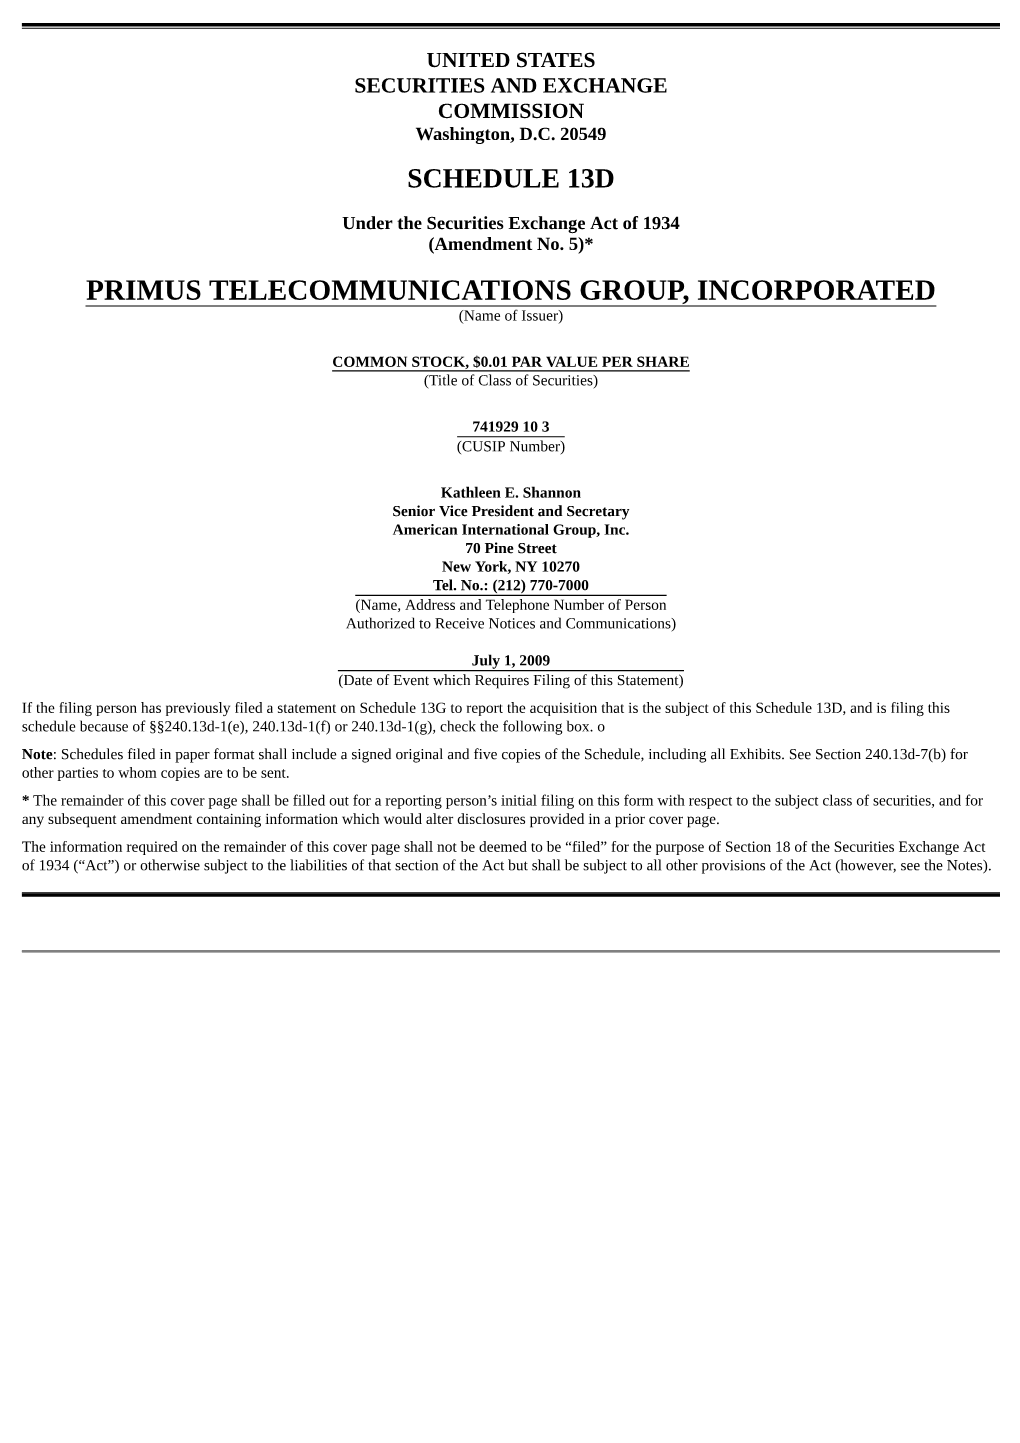 PRIMUS TELECOMMUNICATIONS GROUP, INCORPORATED (Name of Issuer)